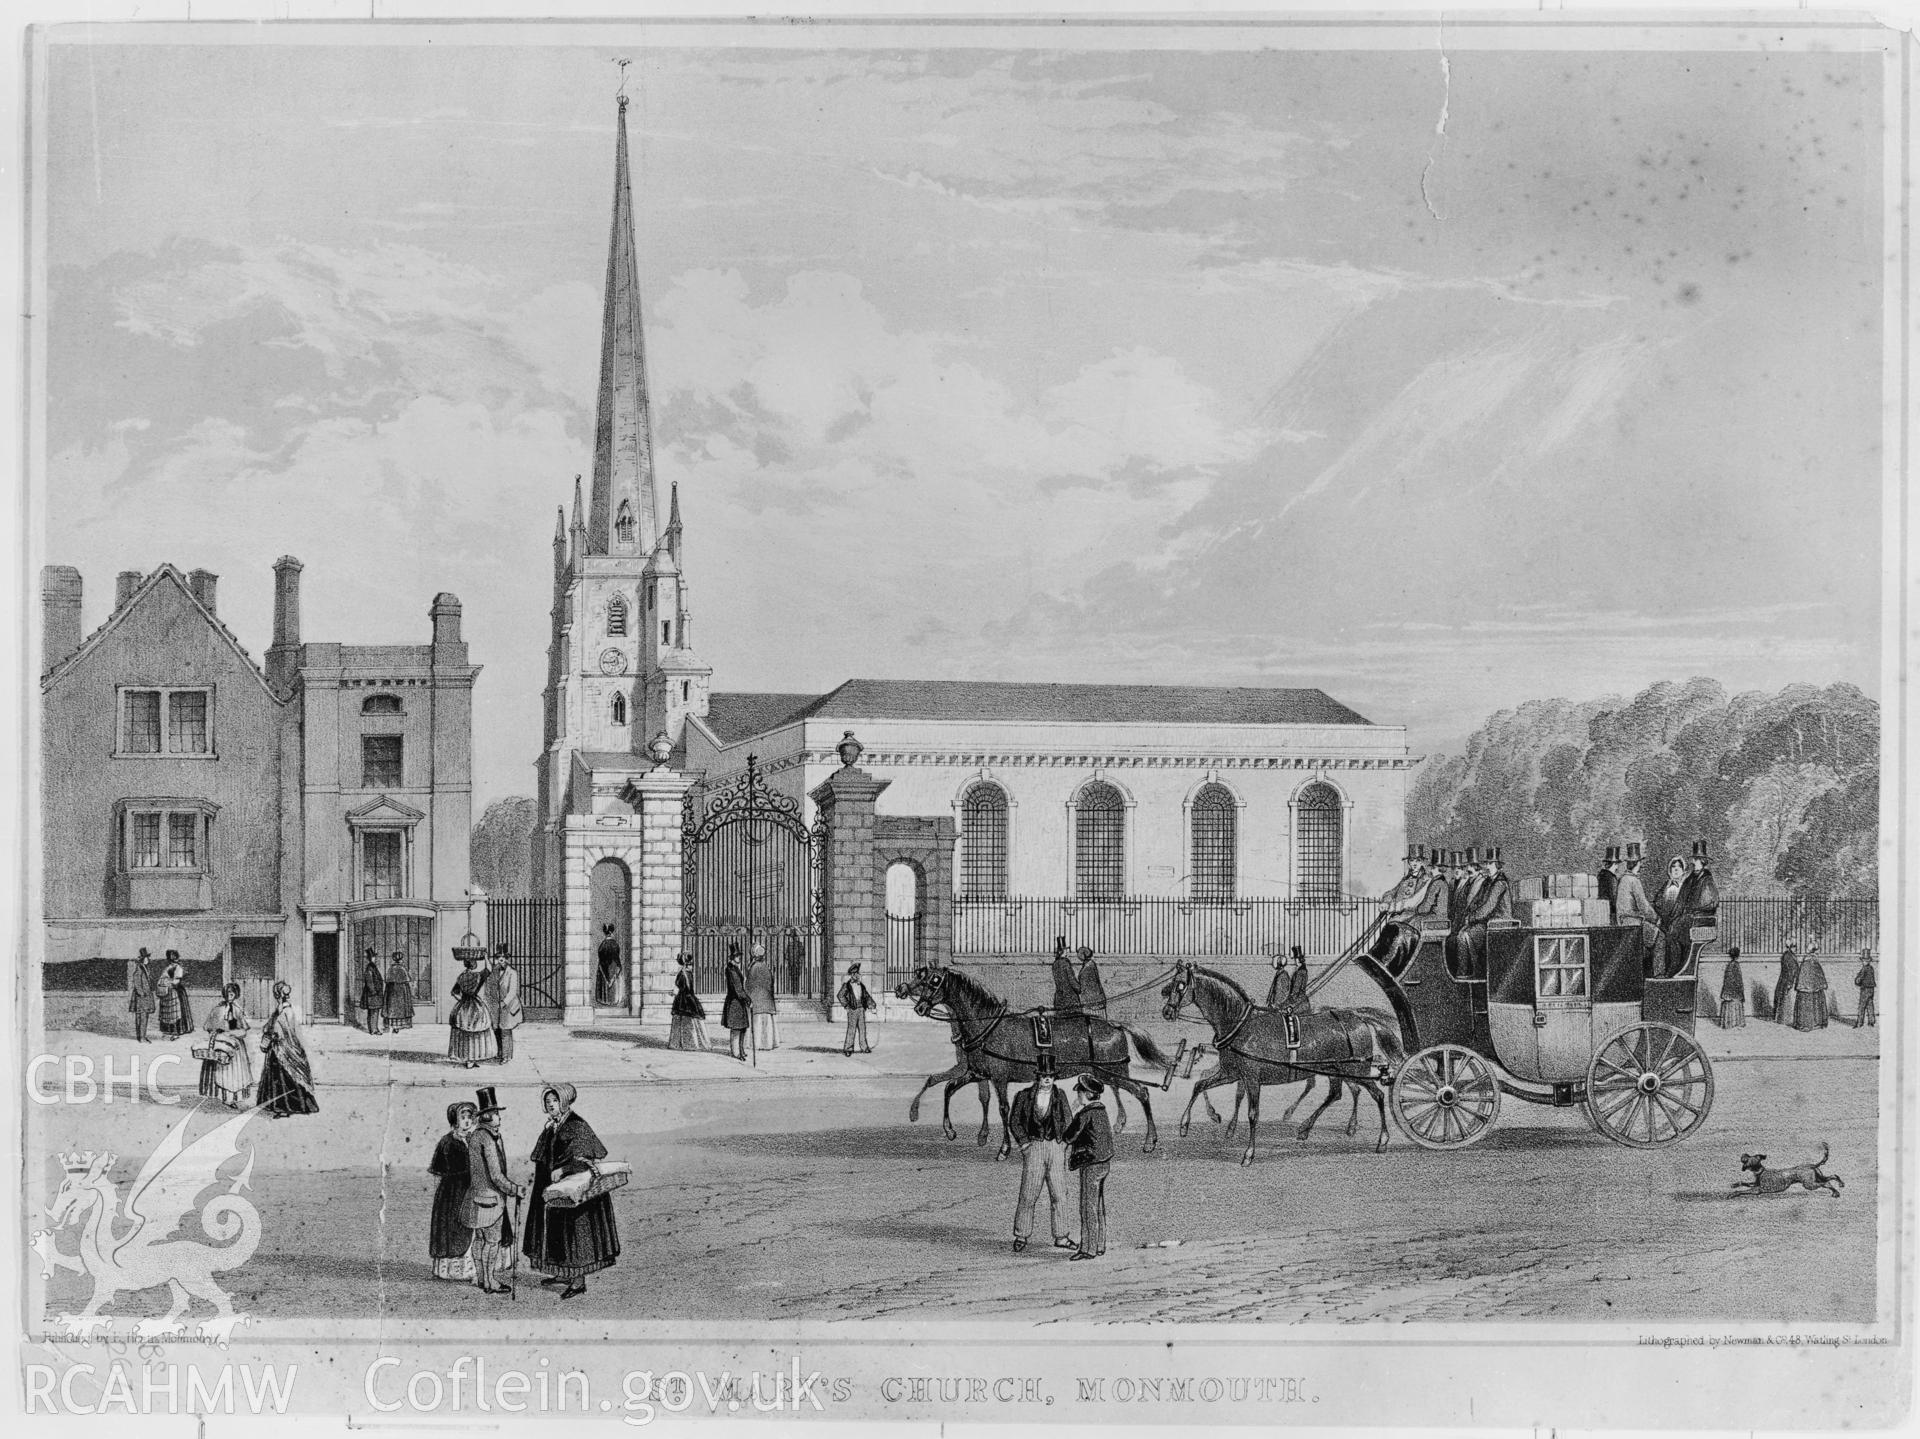 Lithograph of St Mary's Church, Monmouth. Negative held